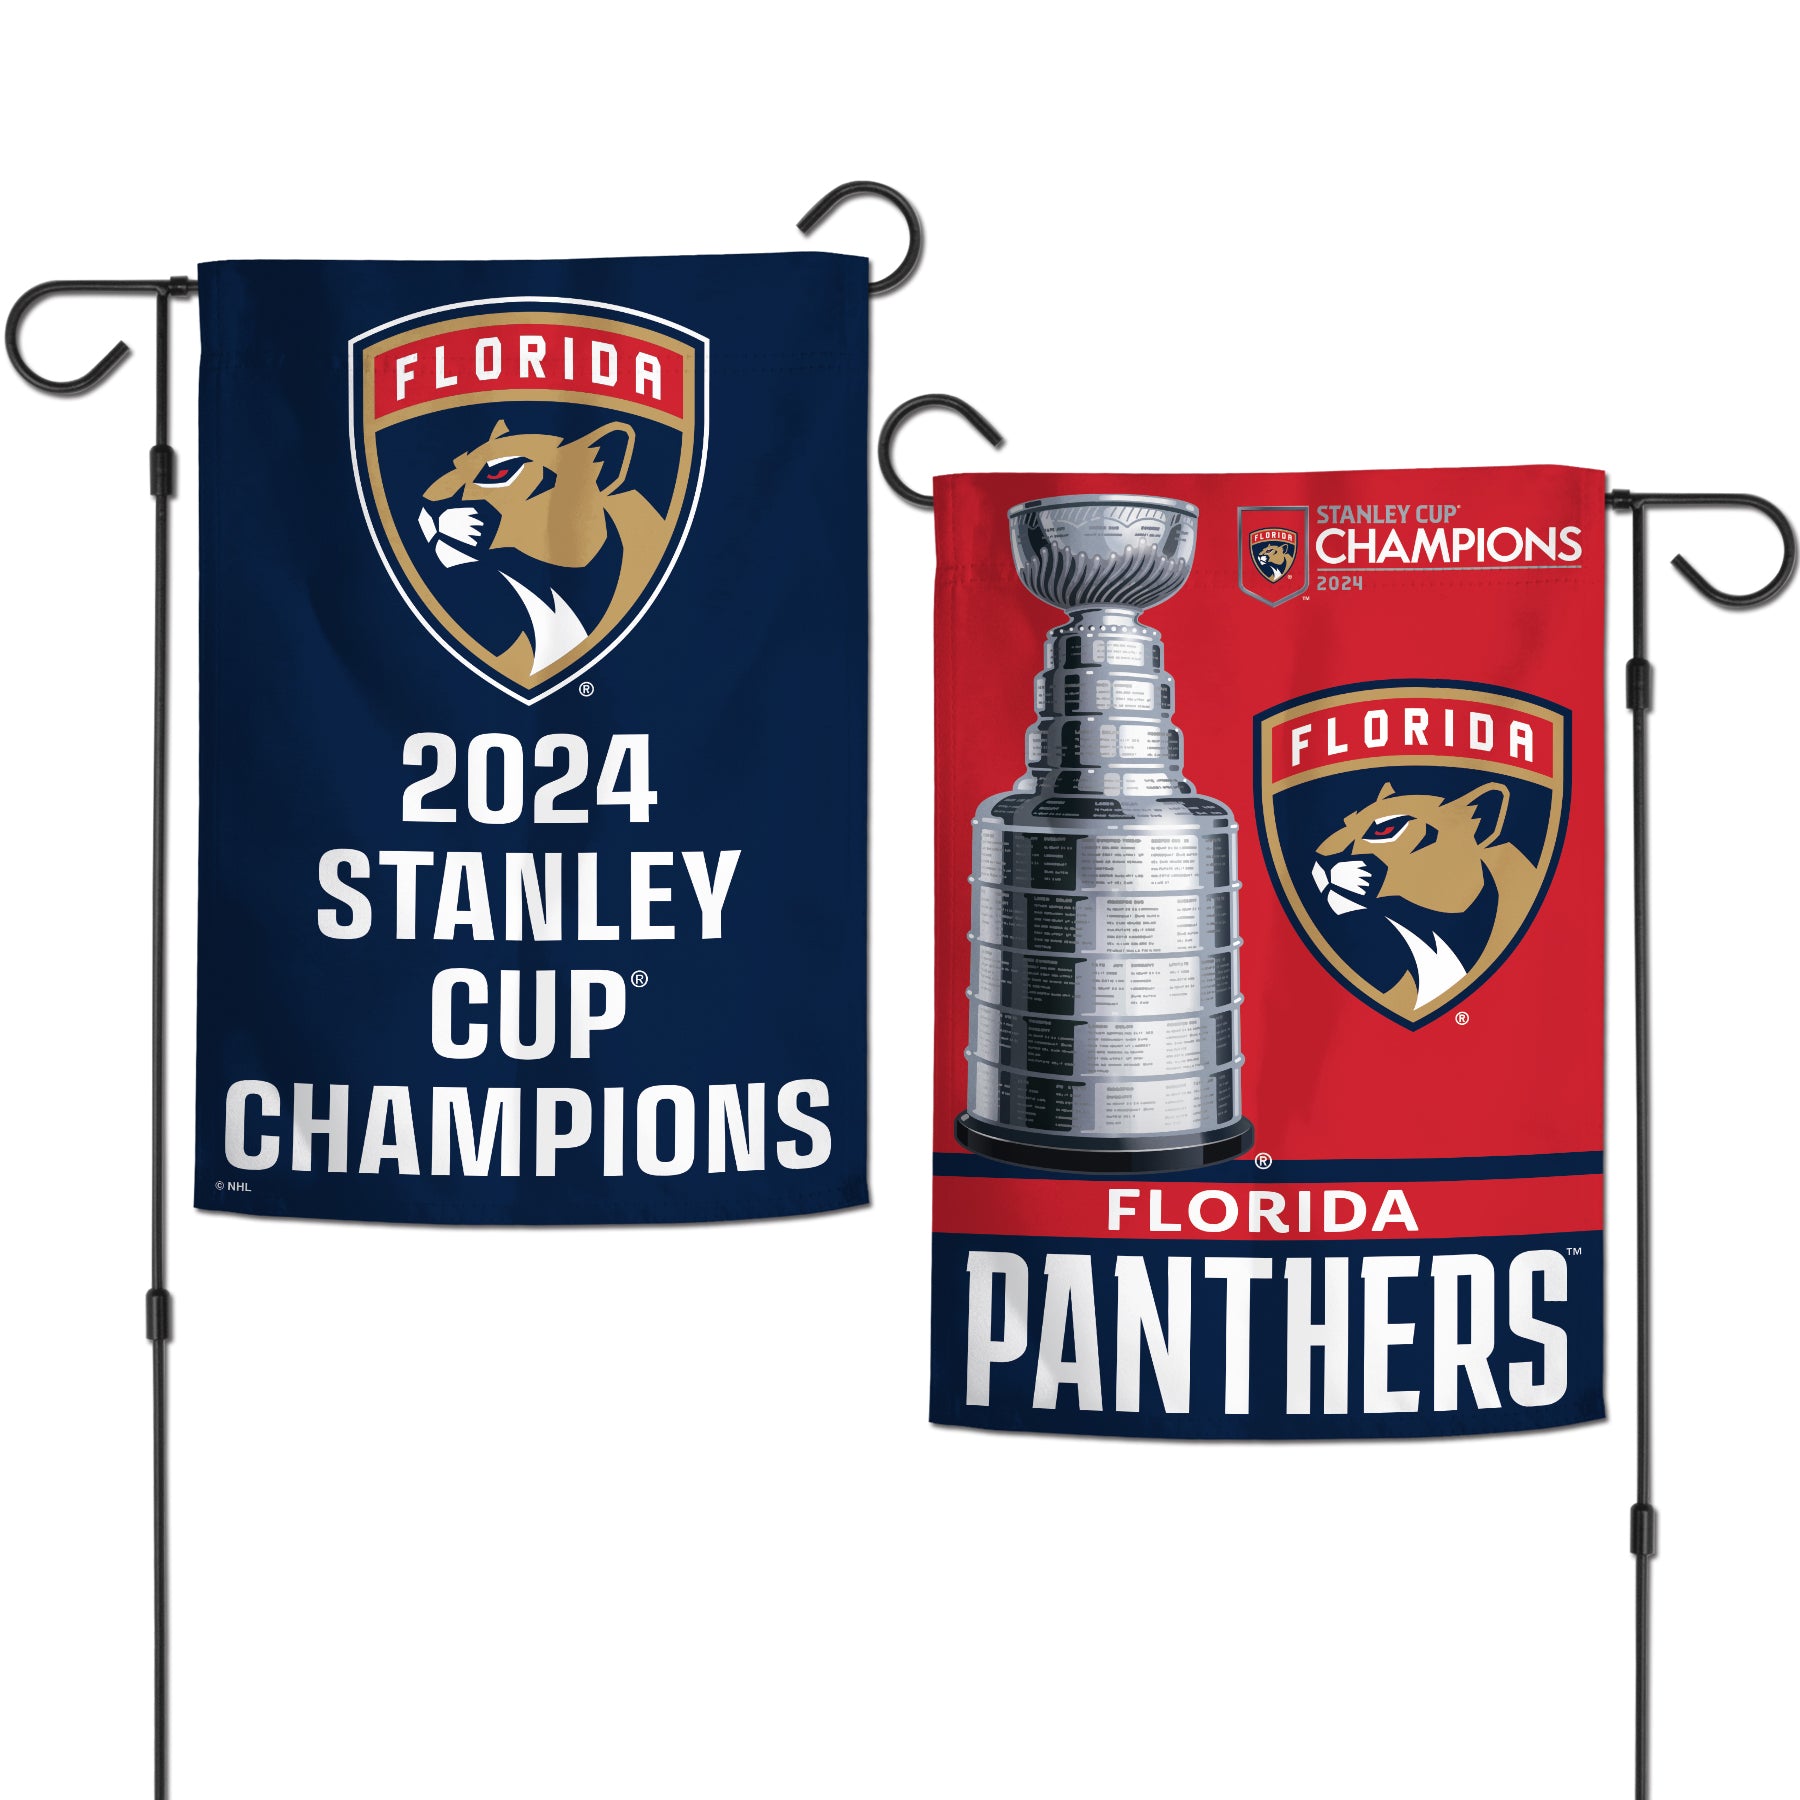 Florida Panthers 2024 Stanley Cup Champions 2-Sided Garden Flag - 12 x 18